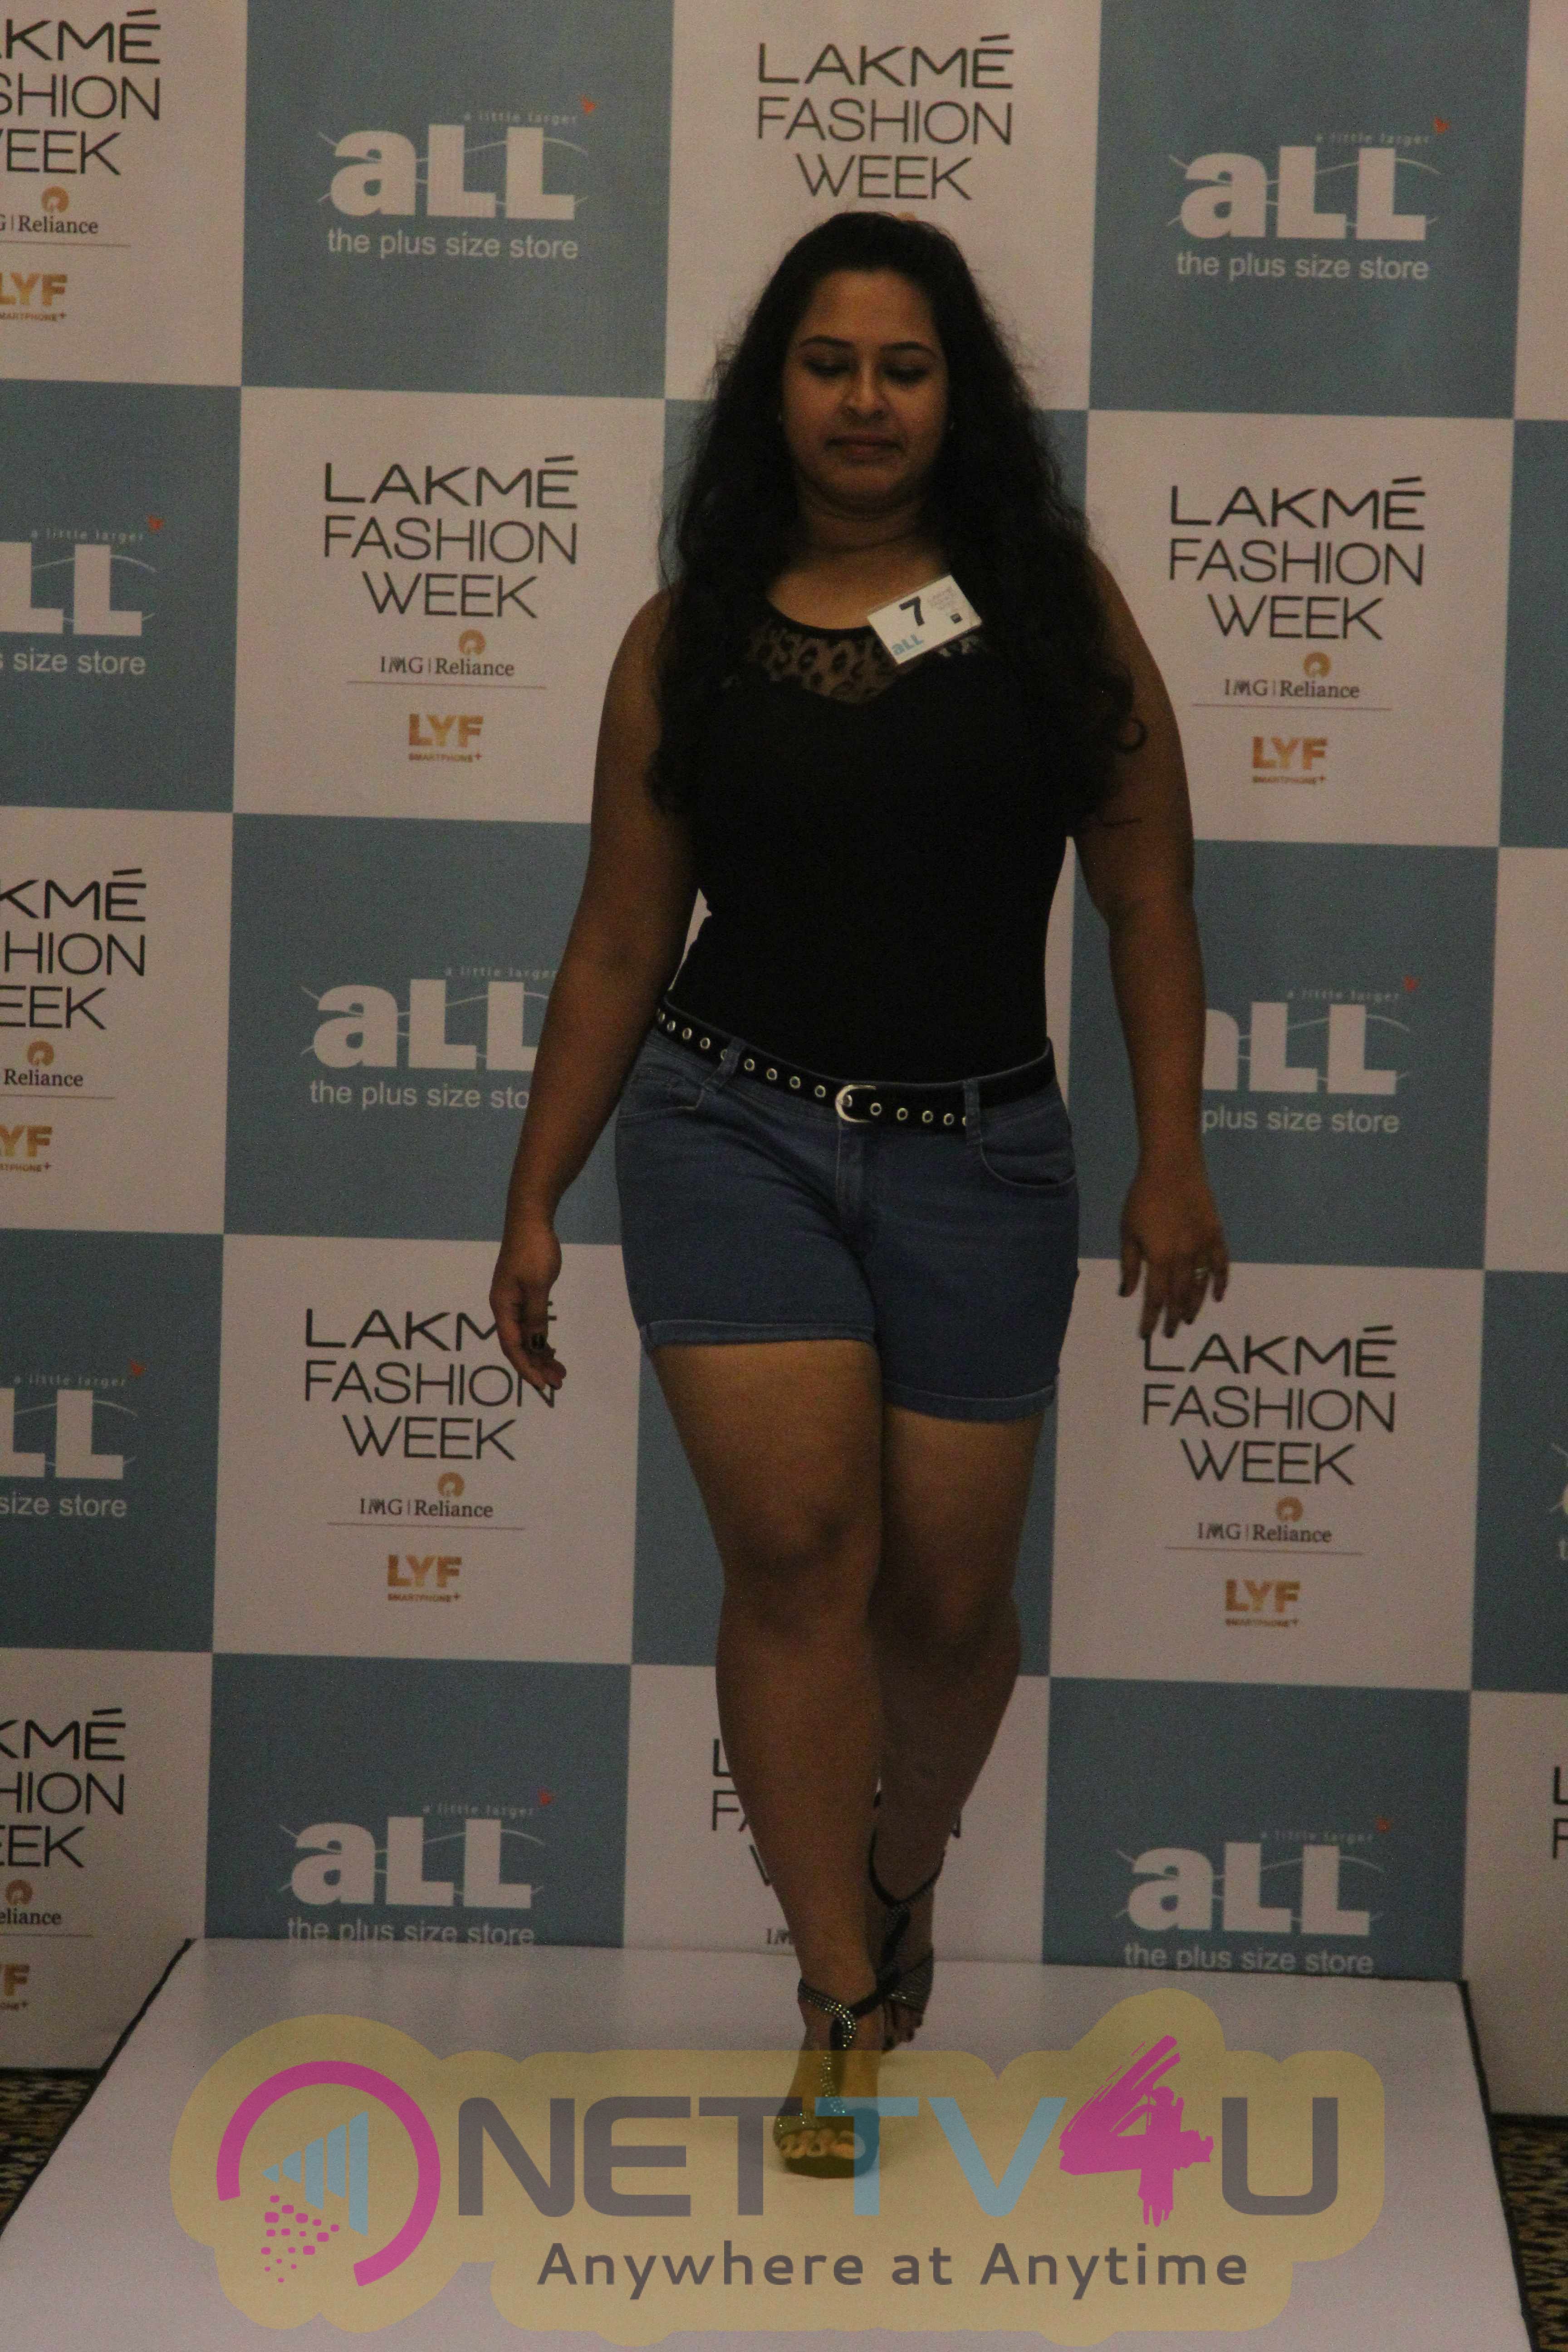 Lakme Fashion Week Host Open Auditions For India's First Ever Plus-size Fashion Show On 29 July 2016 In Mumbai Stills Hindi Gall